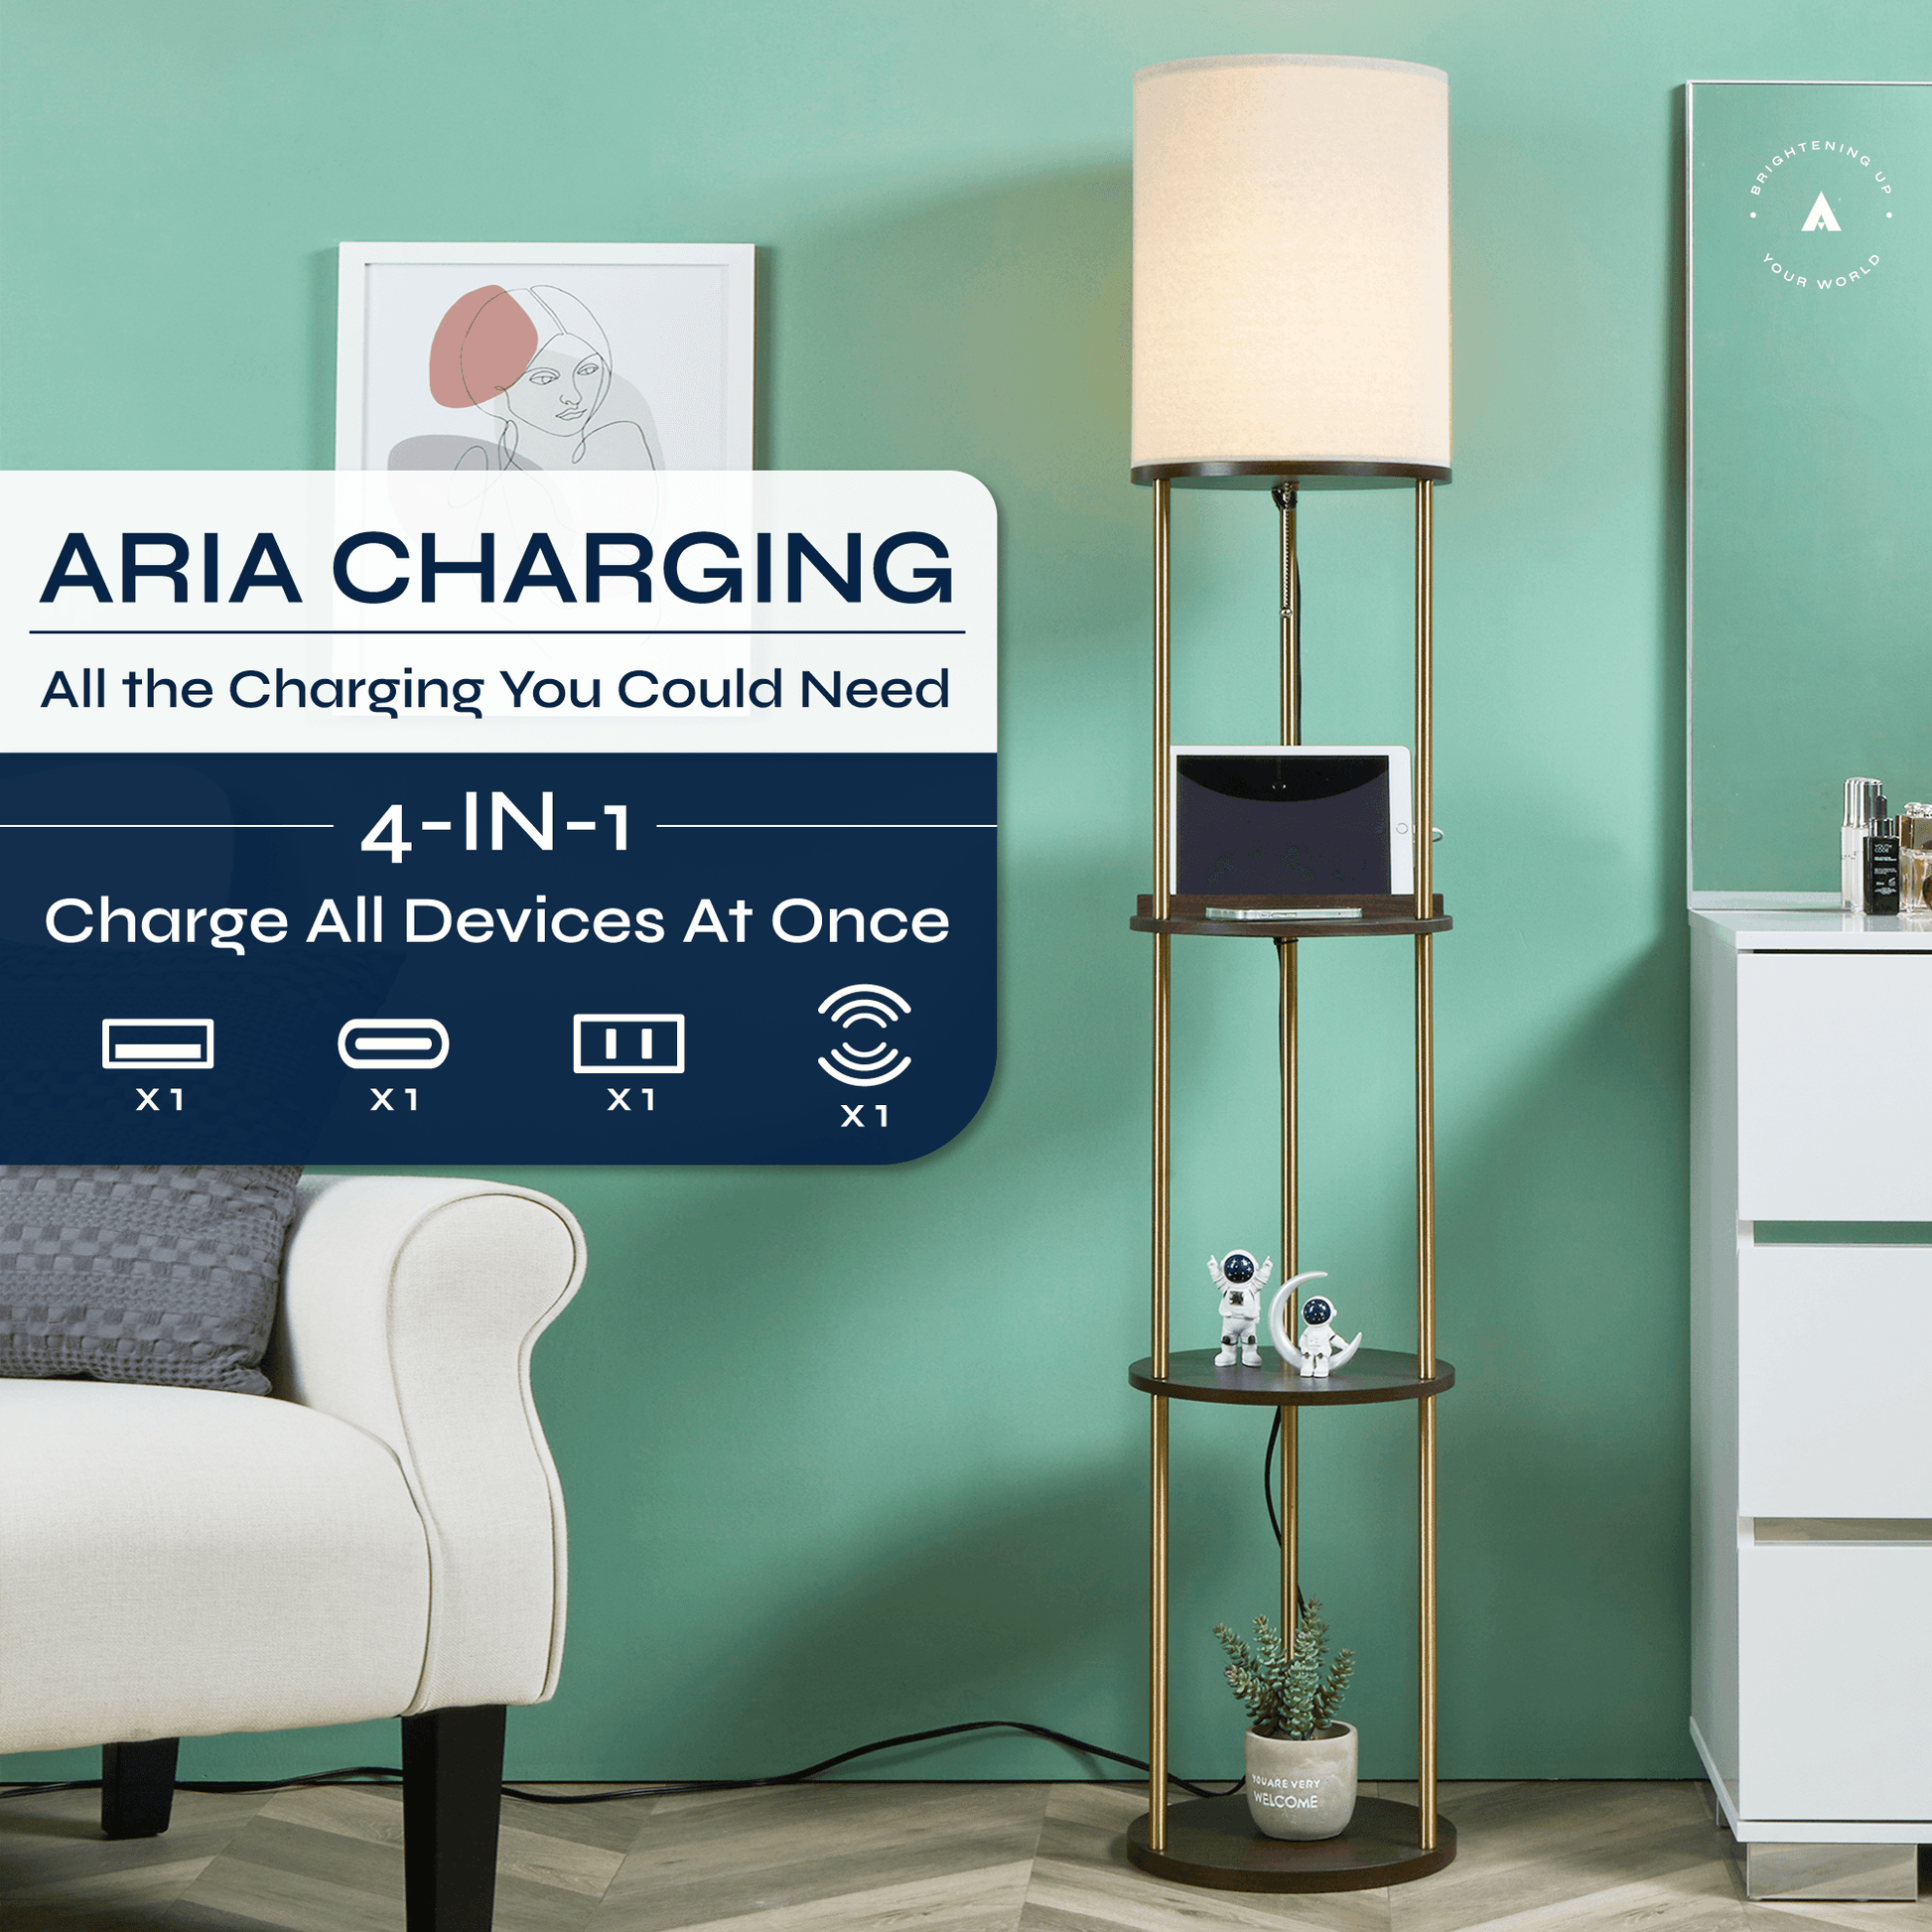 ATAMIN Aria Charger Edition - Modern Floor Lamp with Shelves and Charging Station